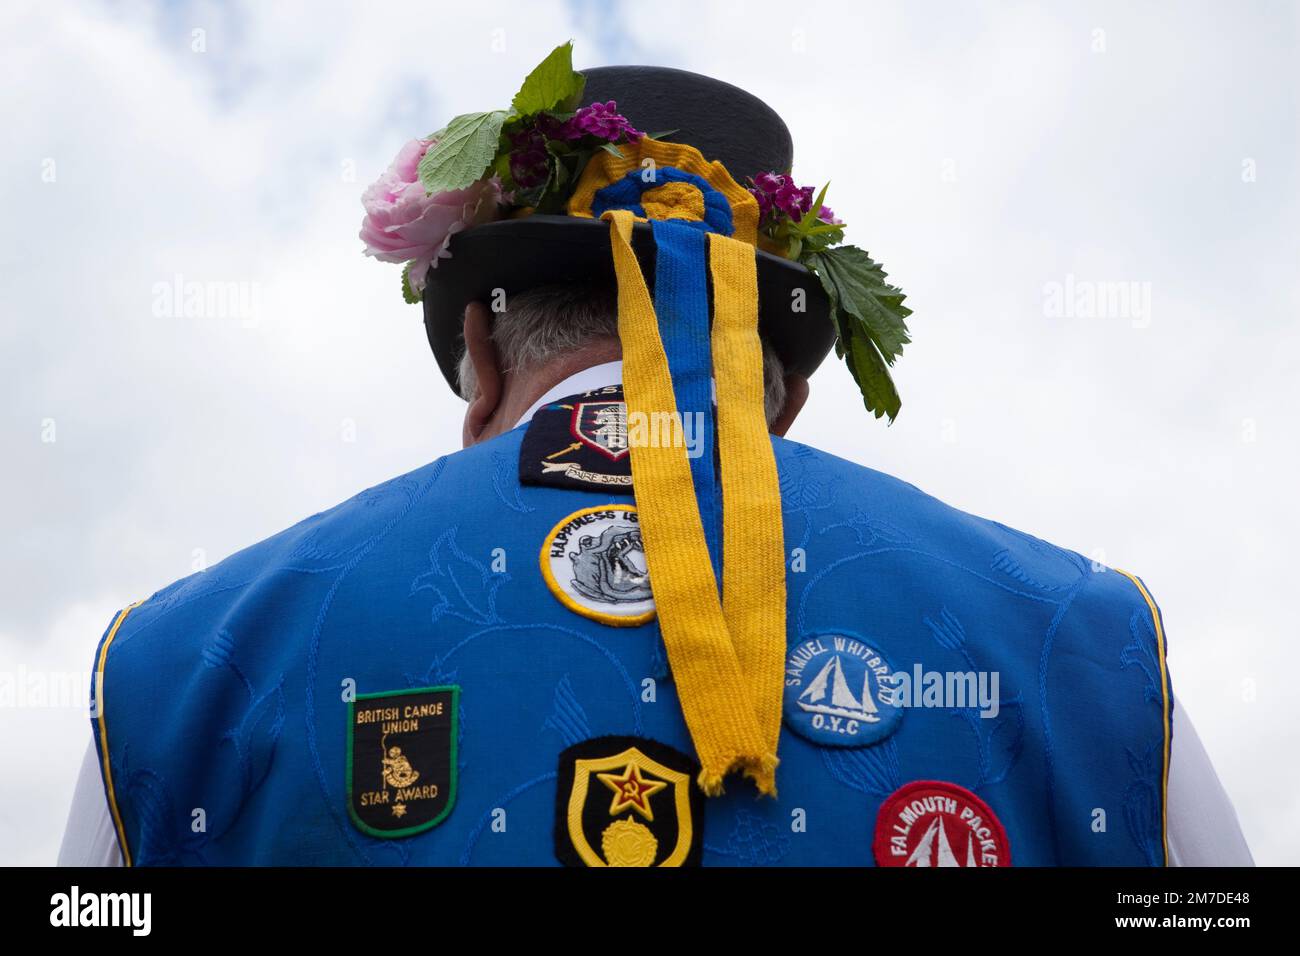 An abstarct view of a Morris dancer, traditinal country entertainment in the UK. Stock Photo